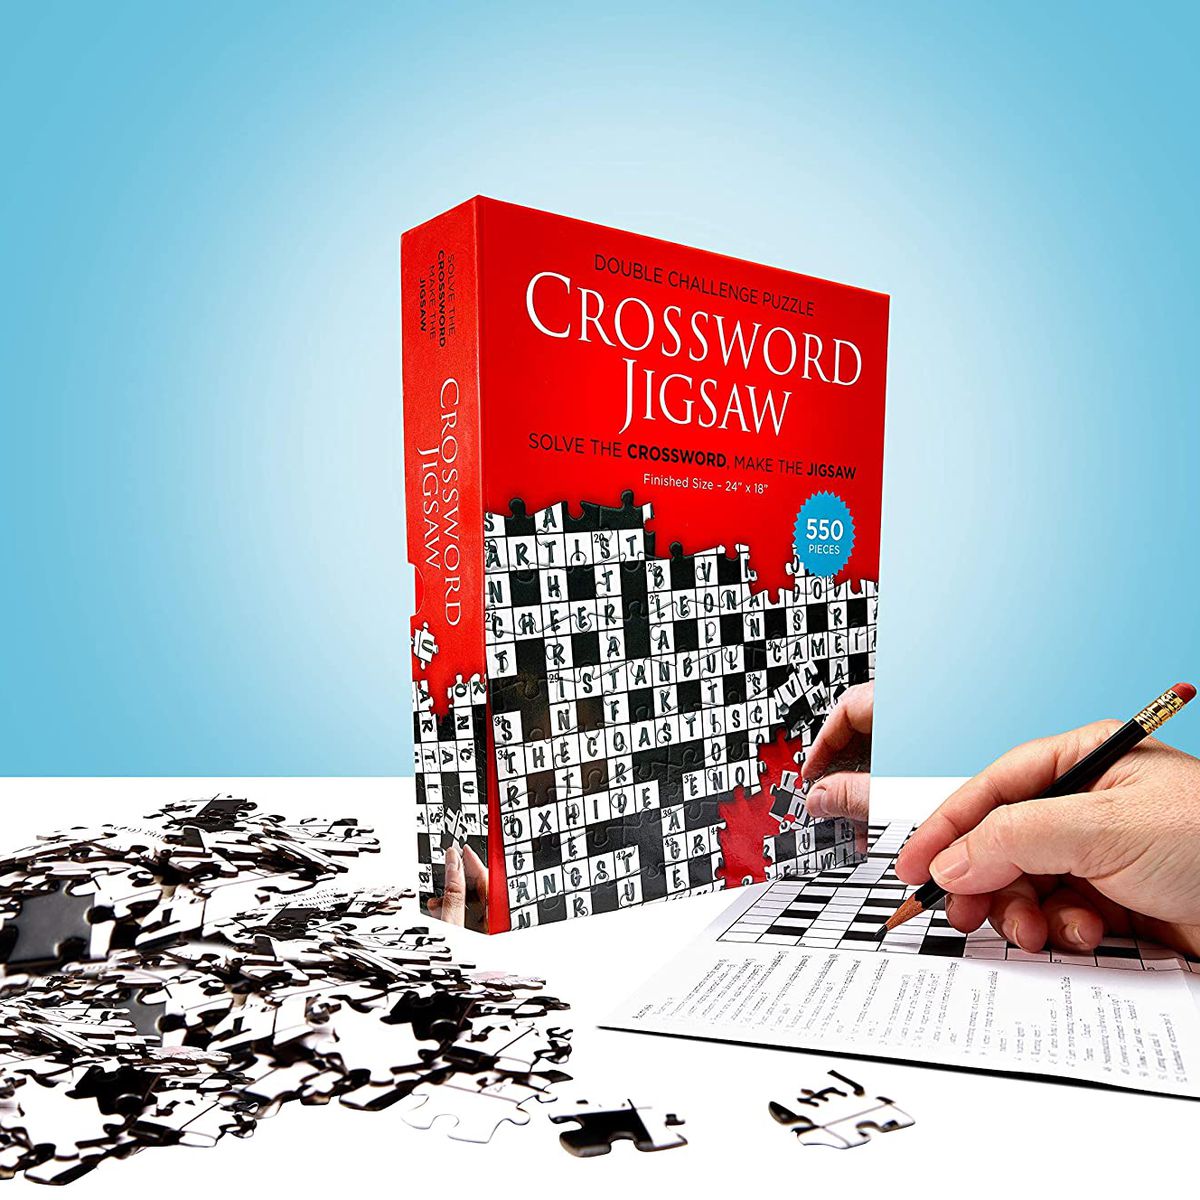 A hand works a crossword puzzle with a puzzle box and pieces in the background